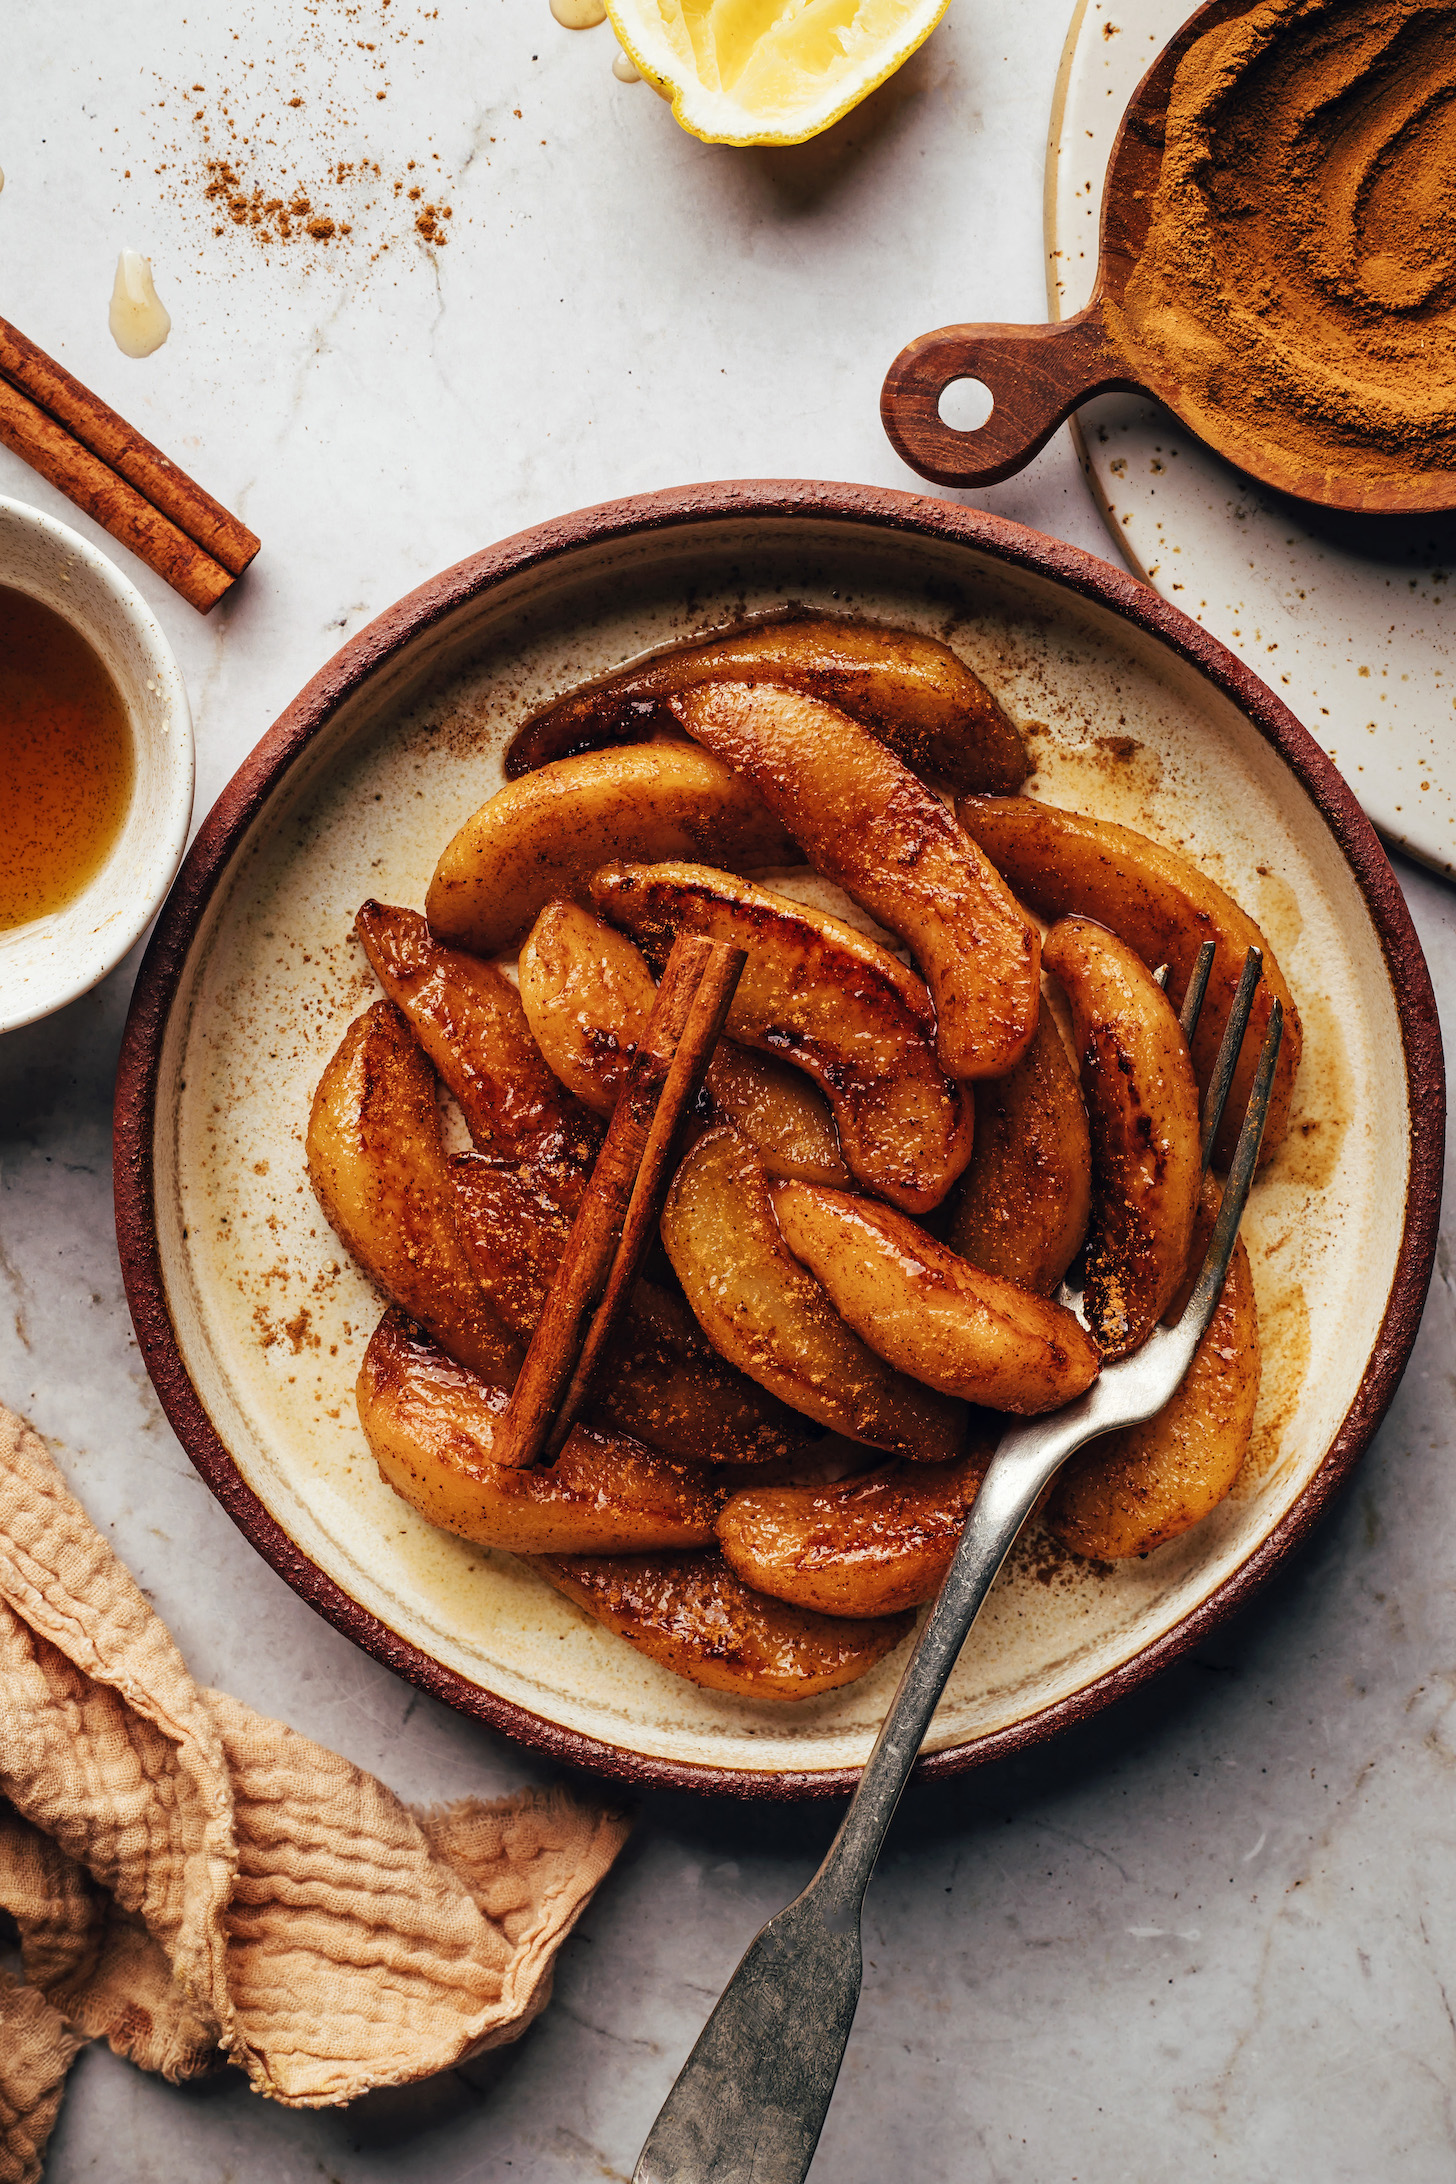 Plate of tender, cinnamon-spiced pears on a plate next to ingredients used to season them